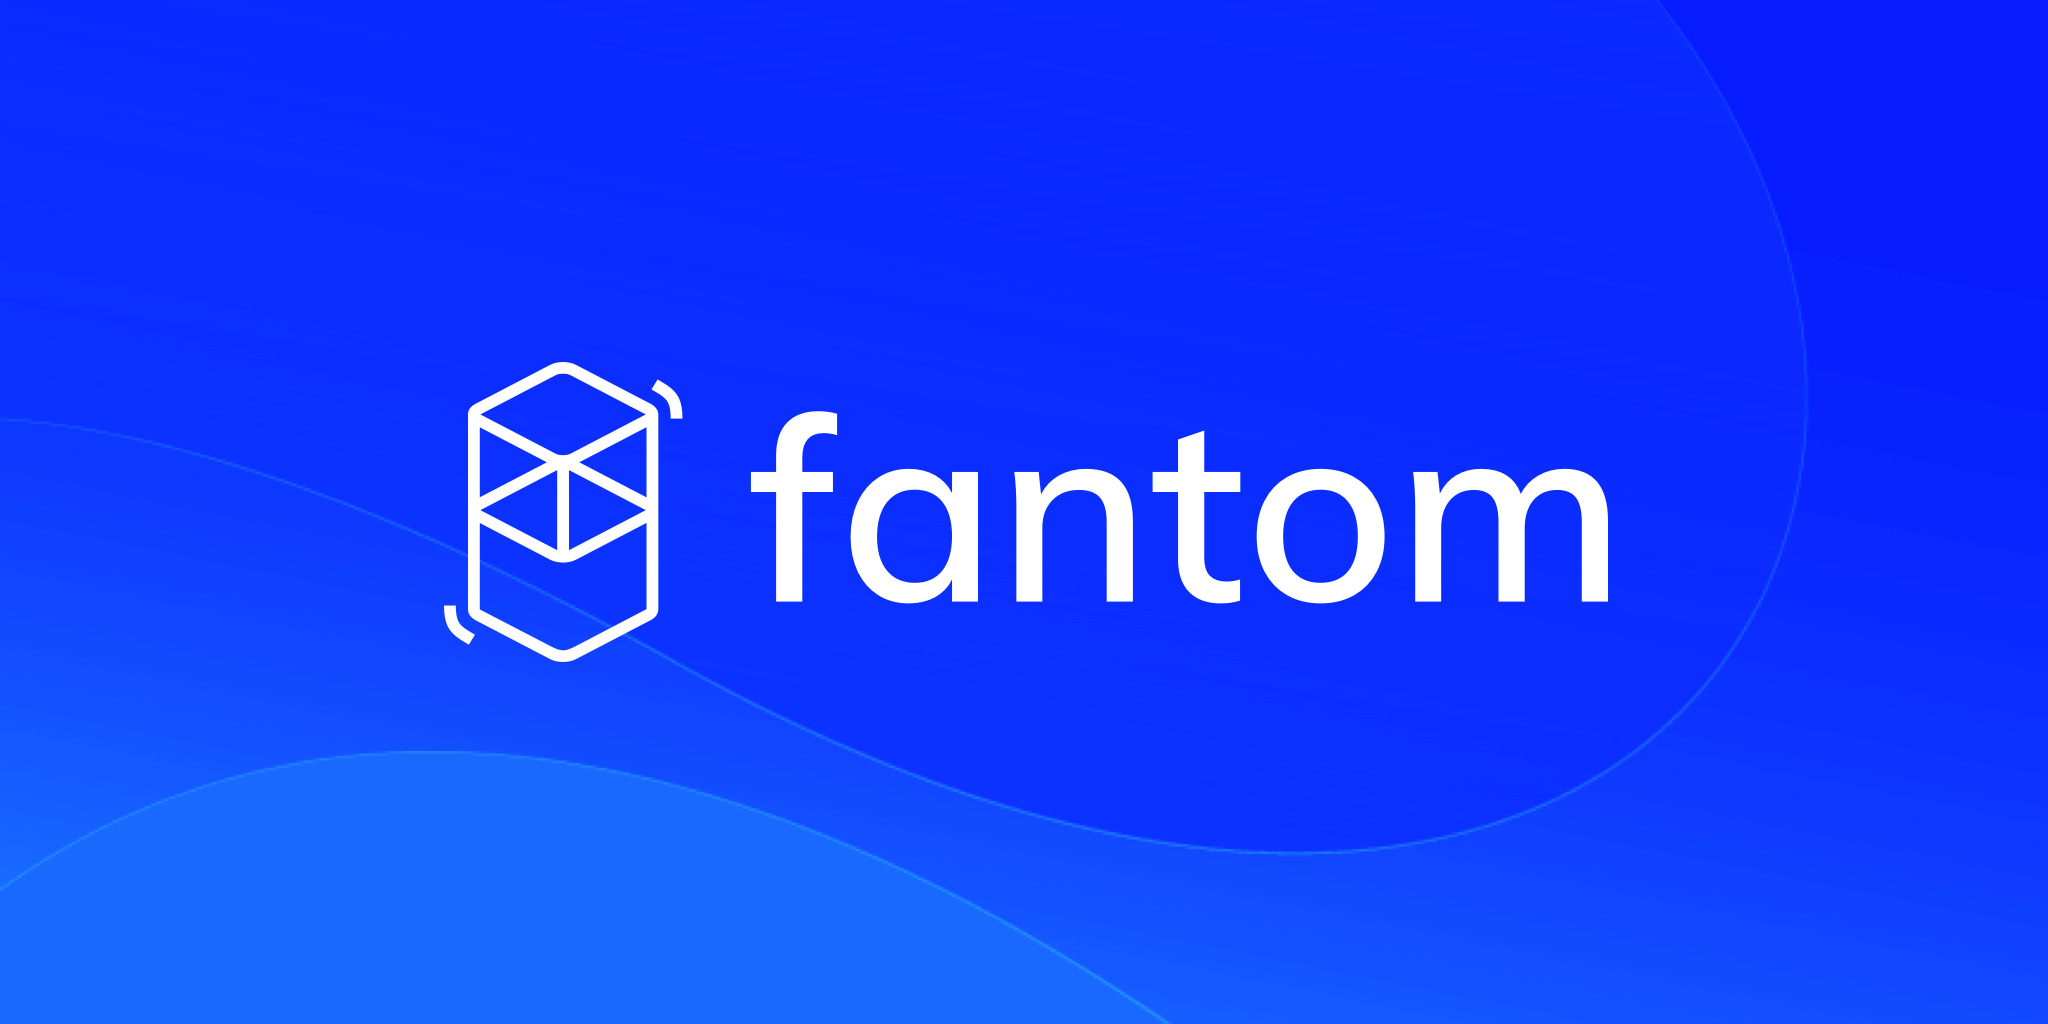 Is Fantom the Last Undervalued L1?